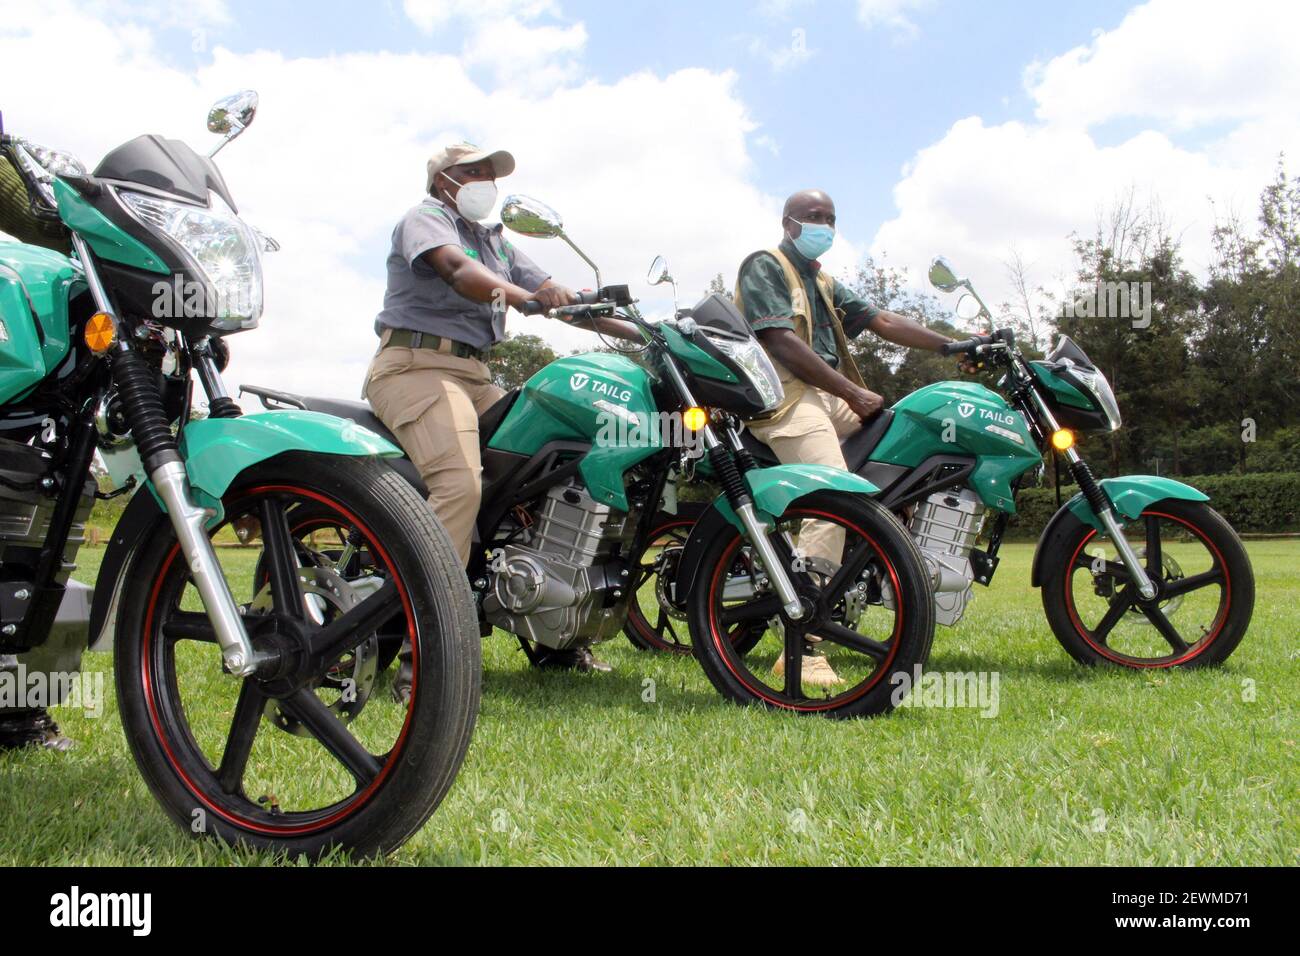 Nairobi, Kenya, March 3, 2021Rangers test electric motorbikes in Nairobi, capital of Kenya, on March 2, 2021. The UN Environment Programme (UNEP) on Tuesday launched a pilot electric bikes project in Kenya's capital, Nairobi, setting the ball rolling for Africa's shift to electric mobility. The project which saw 49 motorcycles from China's Tailing Technology Group made little noise but raised much interest in Nairobi's Karura Forest aims to help policymakers assess the barriers in uptake of the much-needed technological shift towards electric bikes, and to demonstrate that Stock Photo